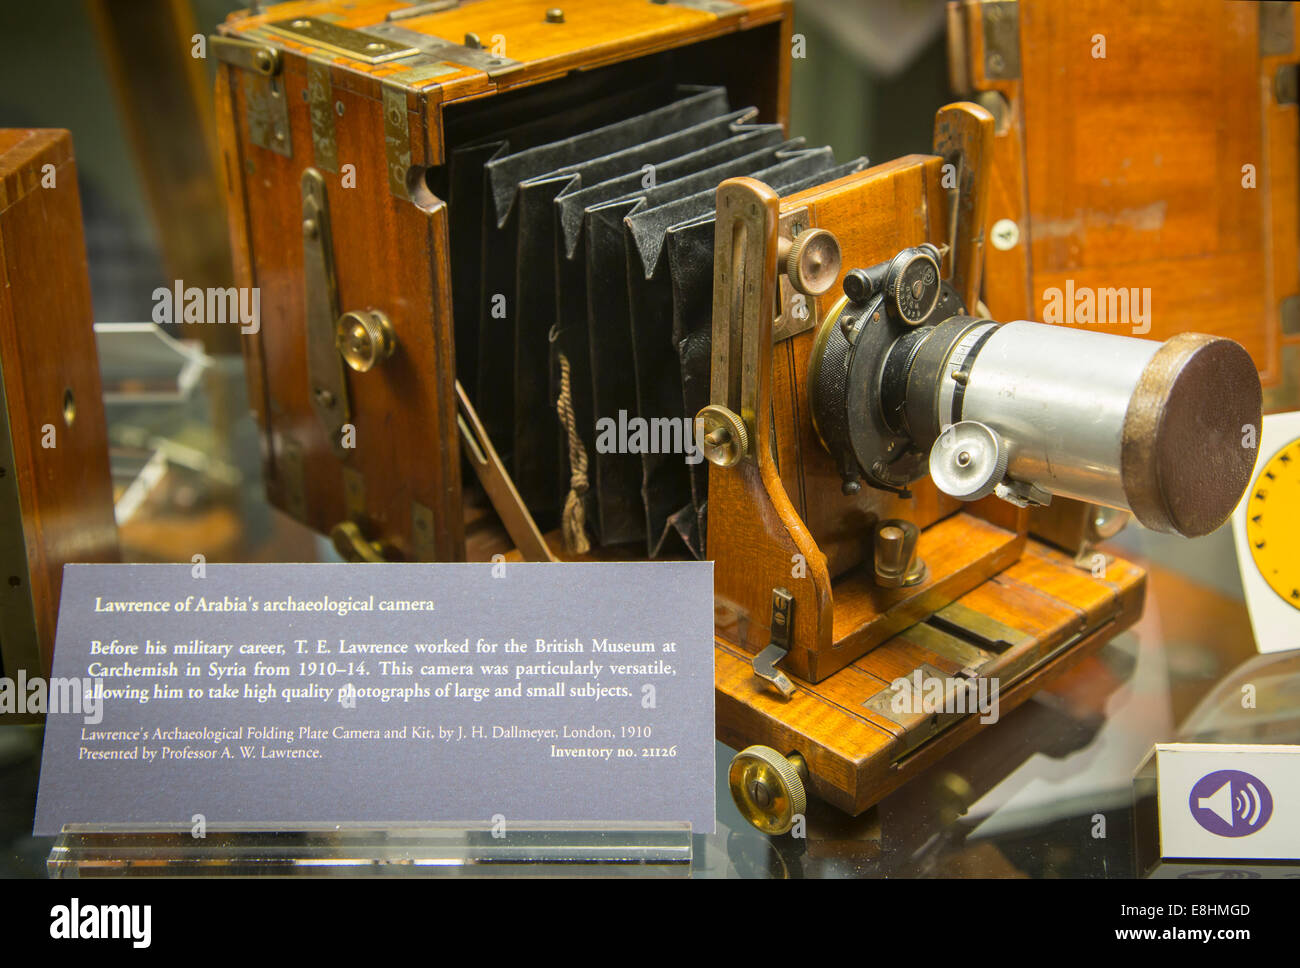 Camera used for Archaeological research by Lawrence of Arabia on display at the Science Museum, Oxford University, England Stock Photo